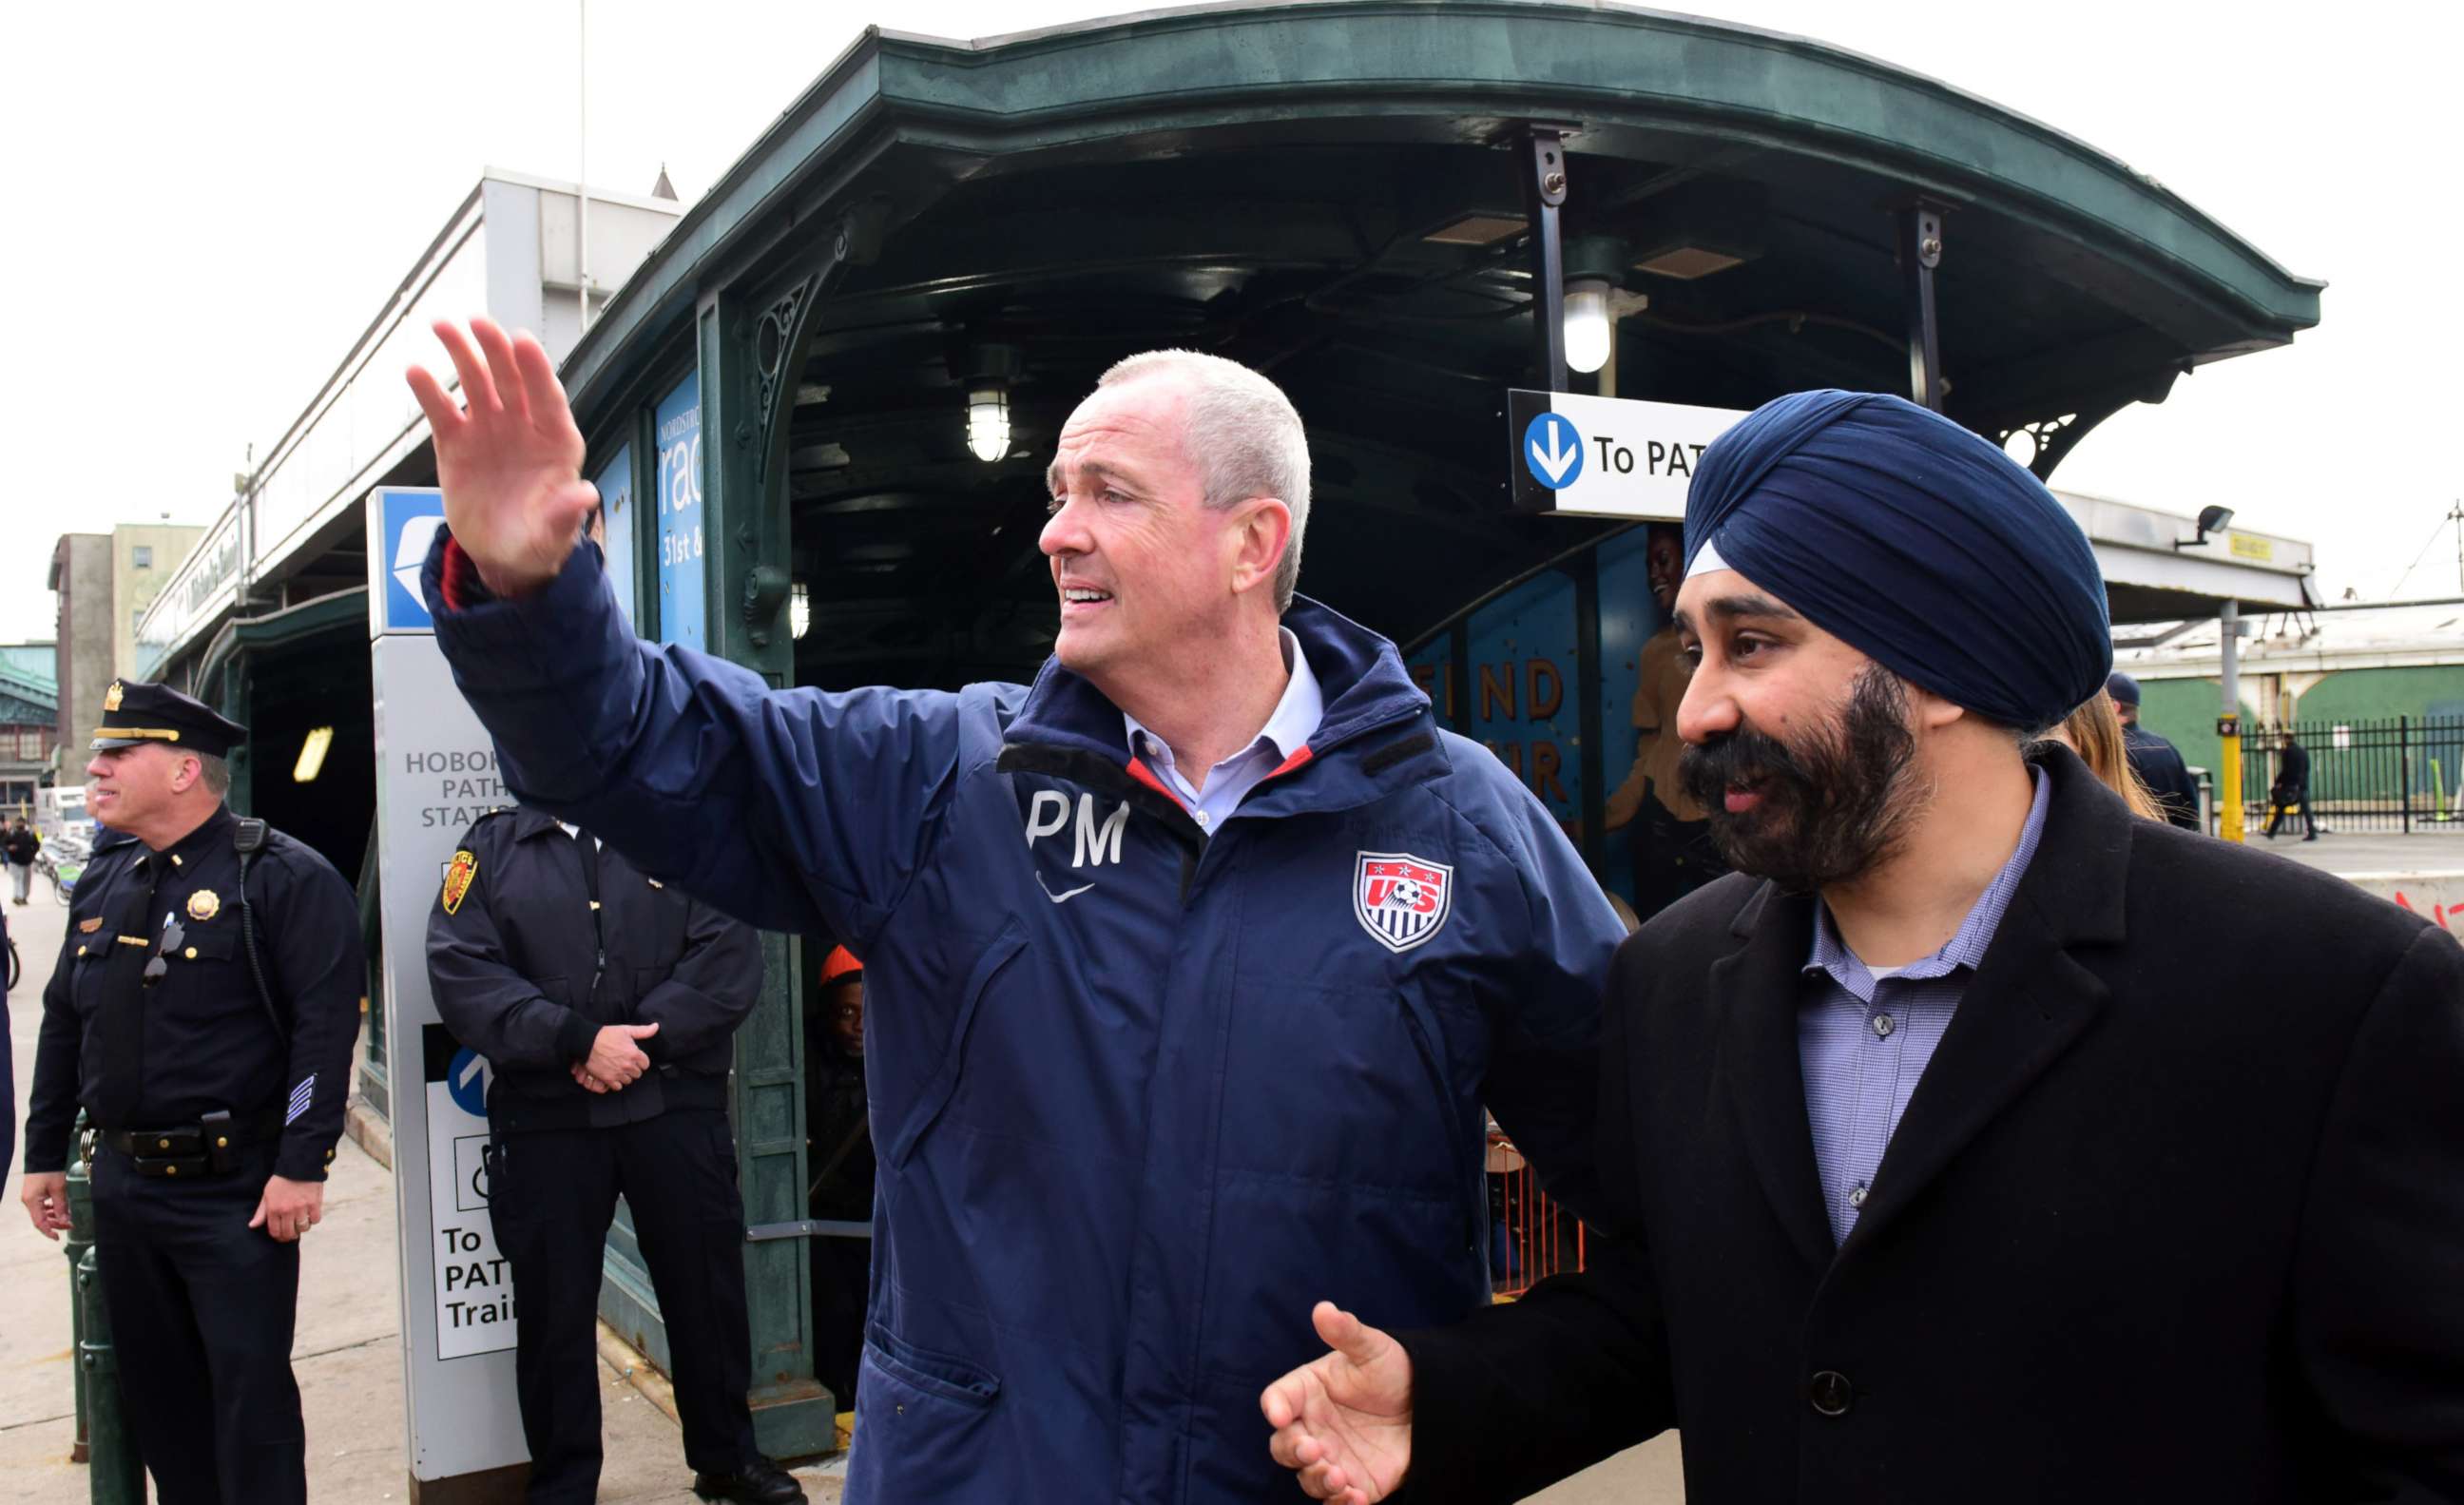 PHOTO: Phil Murphy, New Jersey Governor Elect, left, with Hoboken Mayor Elect Ravi Bhalla as they greet commuters at the Hoboken Path Station, Nov. 8, 2017.